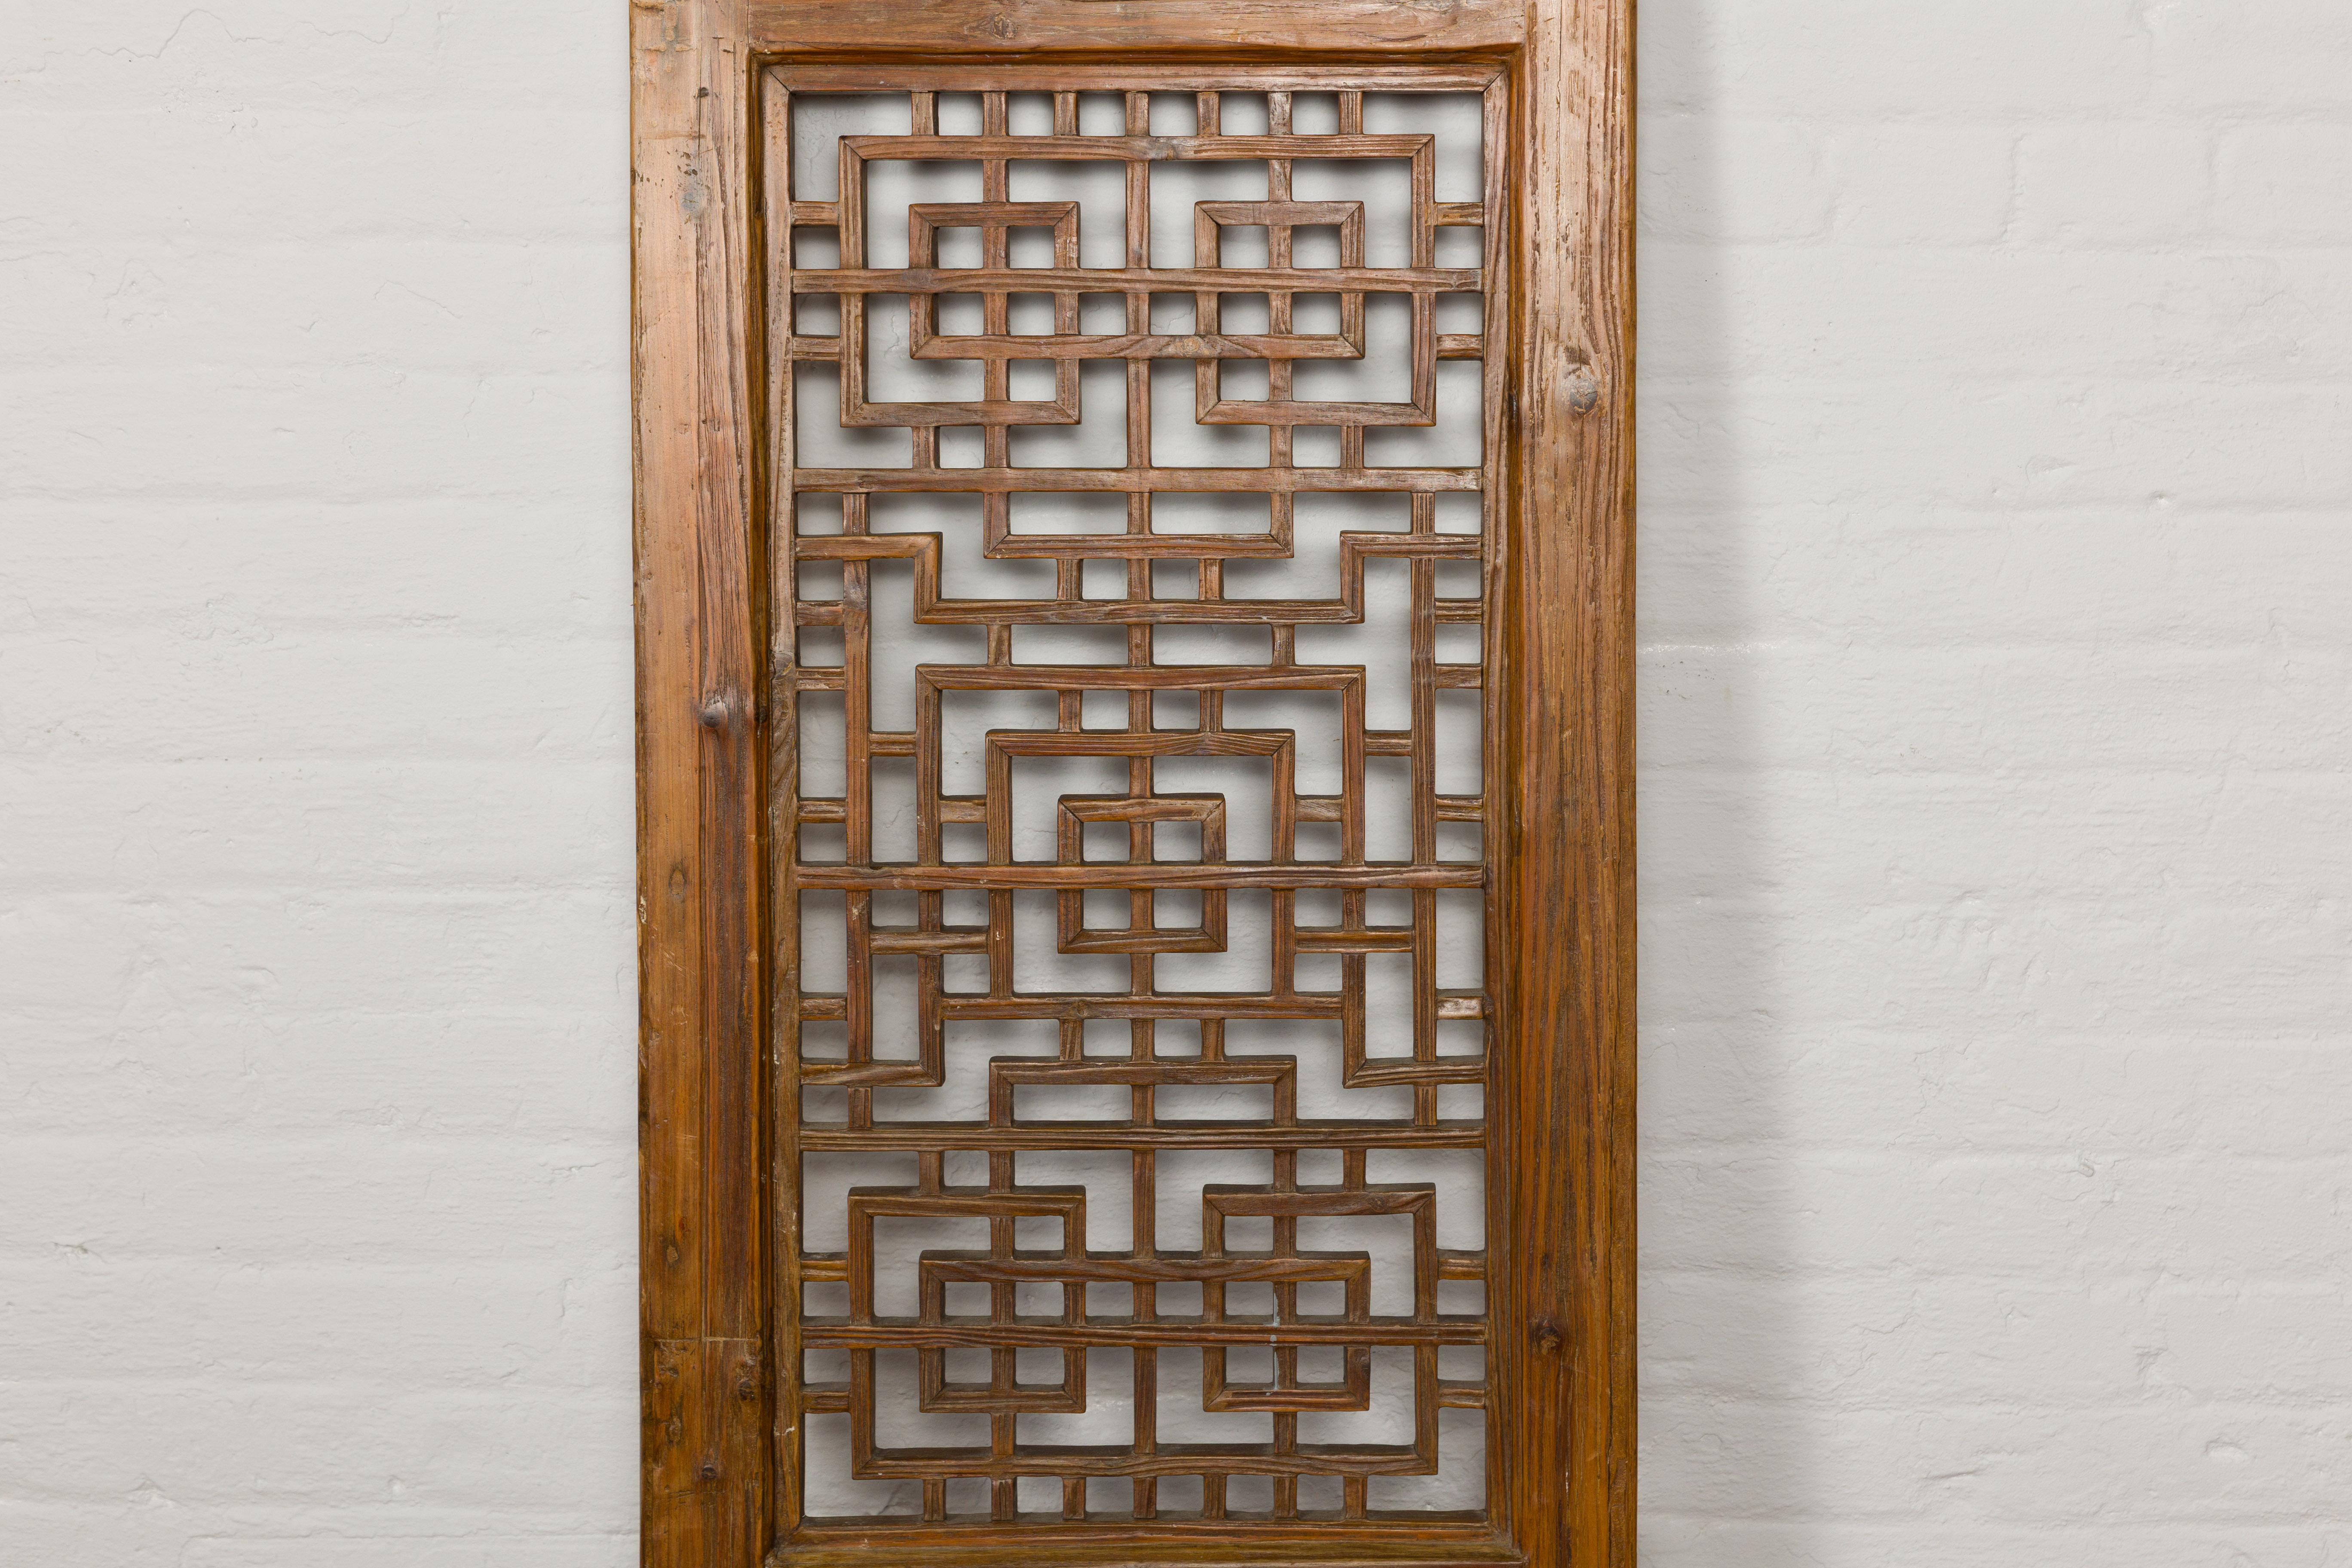 Chinese Qing Dynasty 19th Century Fretwork Screen with Carved Scrolling Motifs For Sale 5